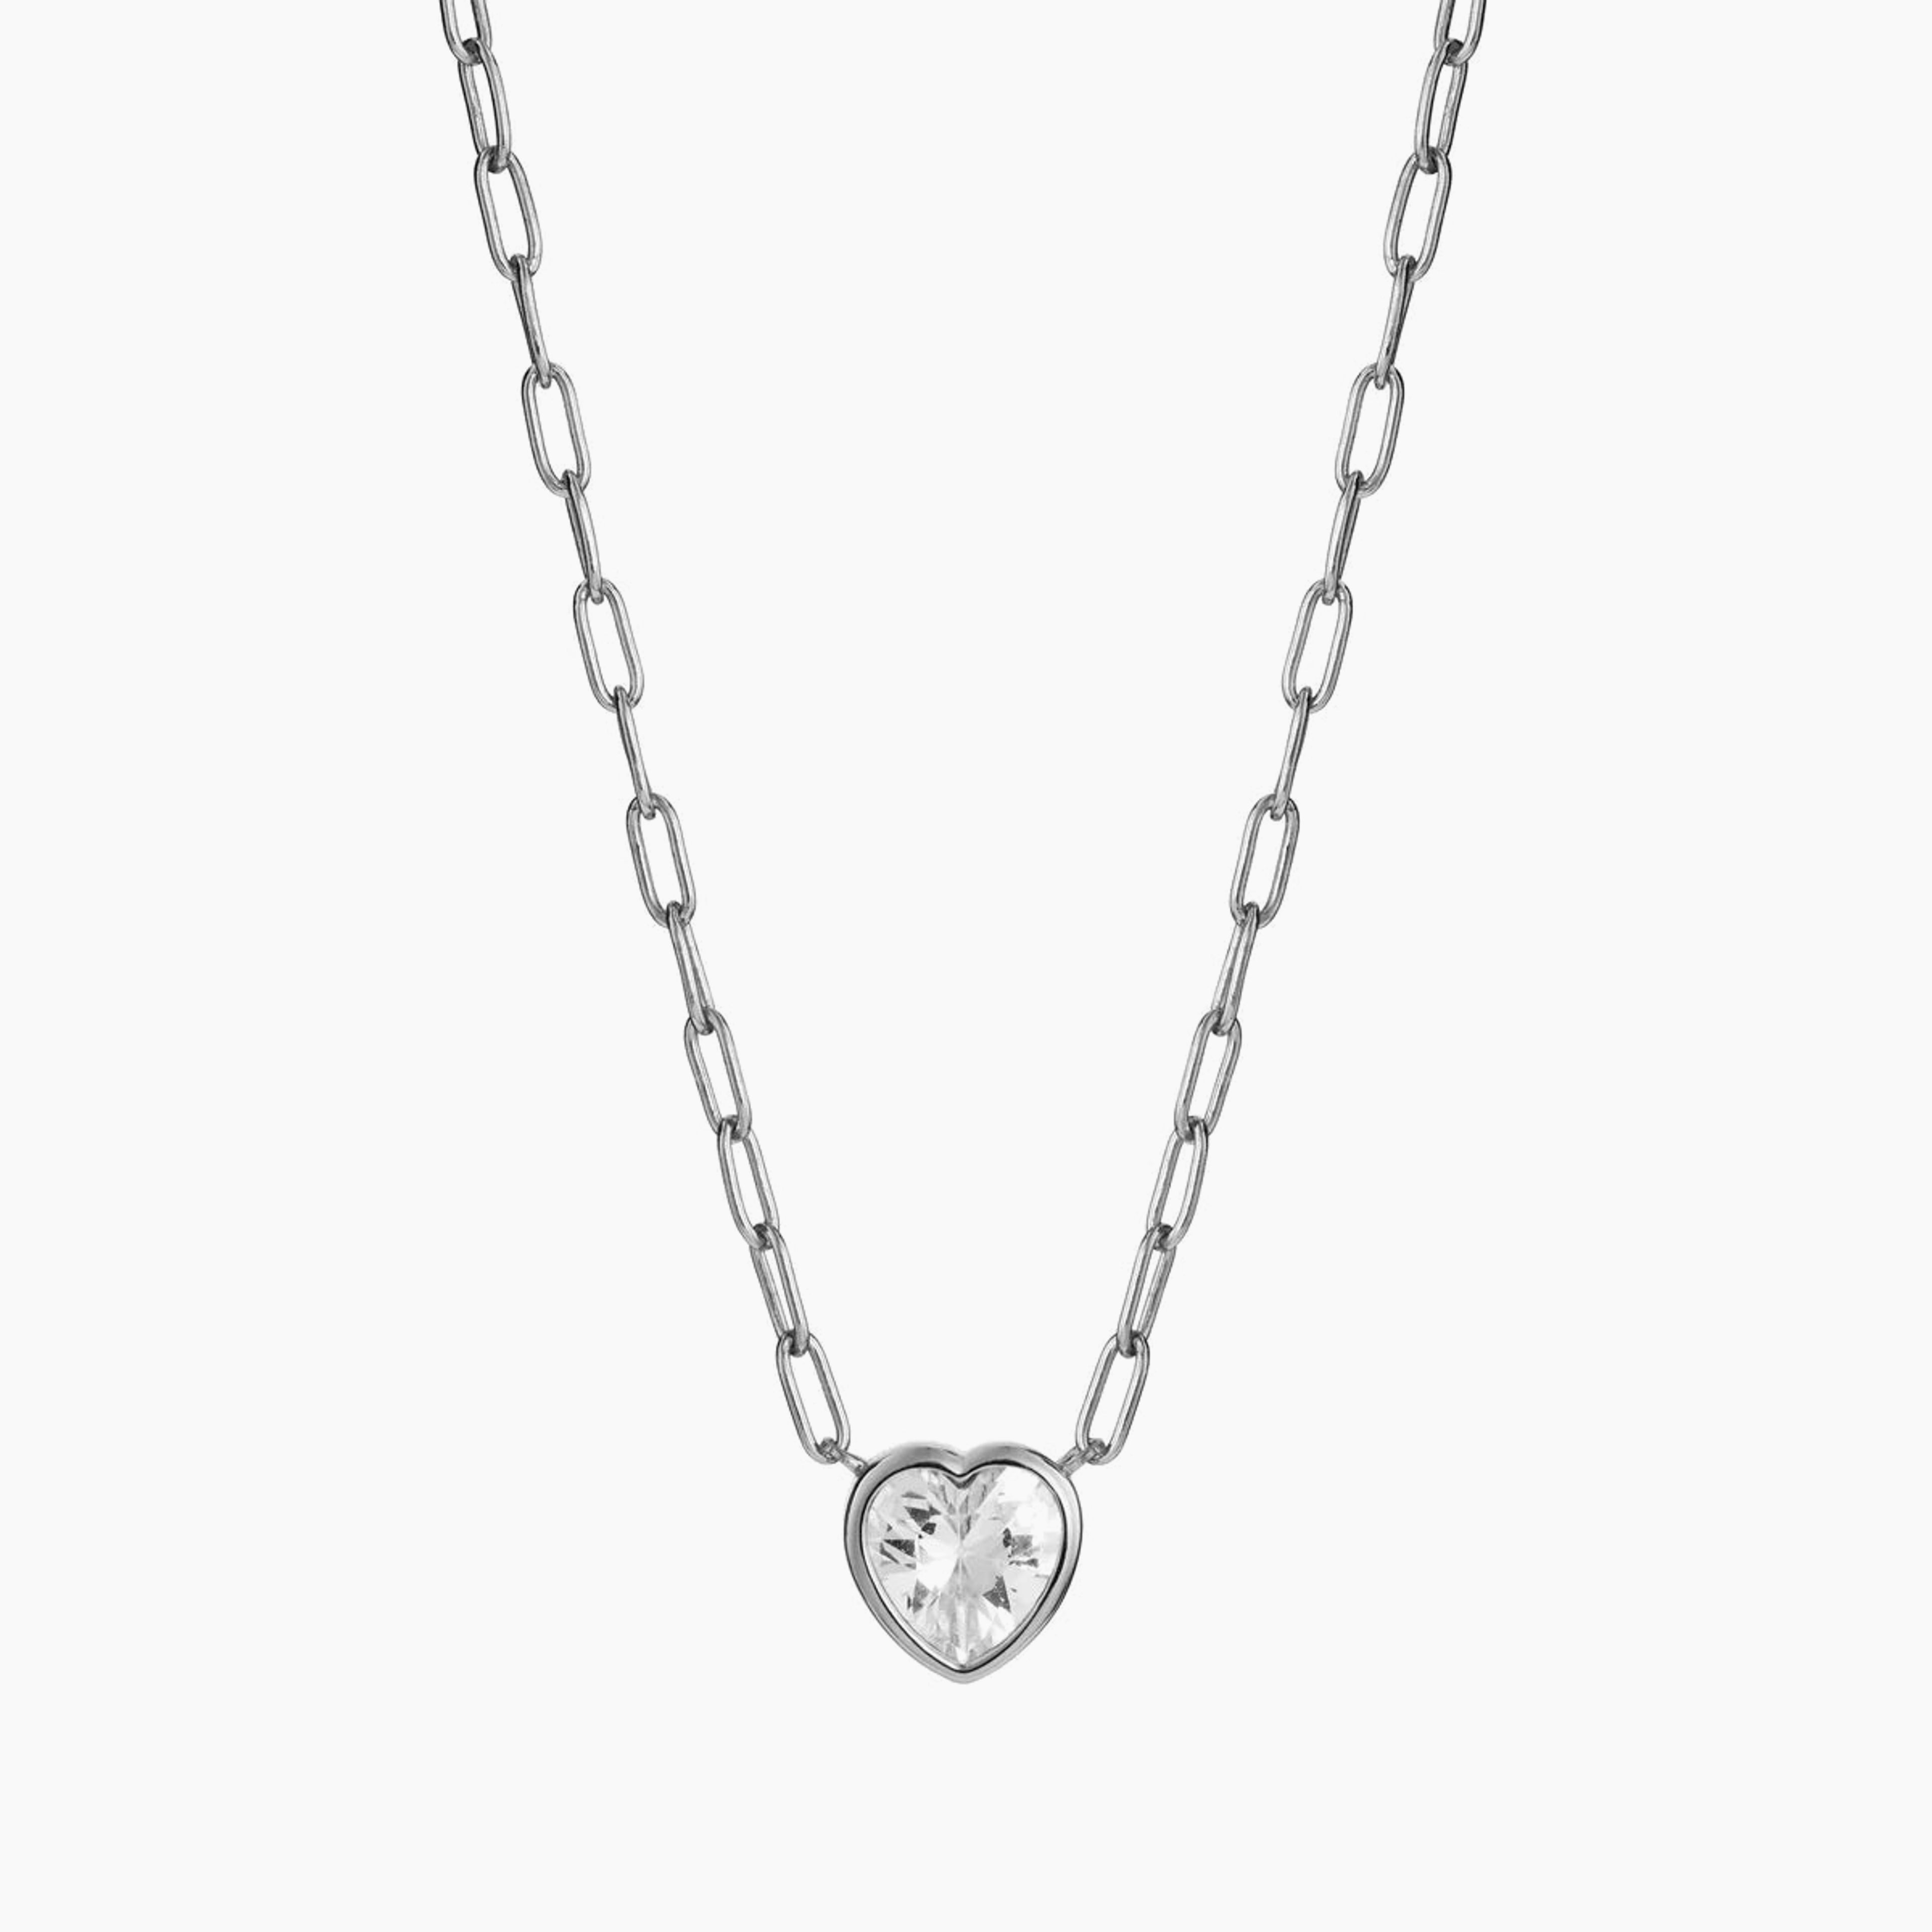 Heart Link Necklace